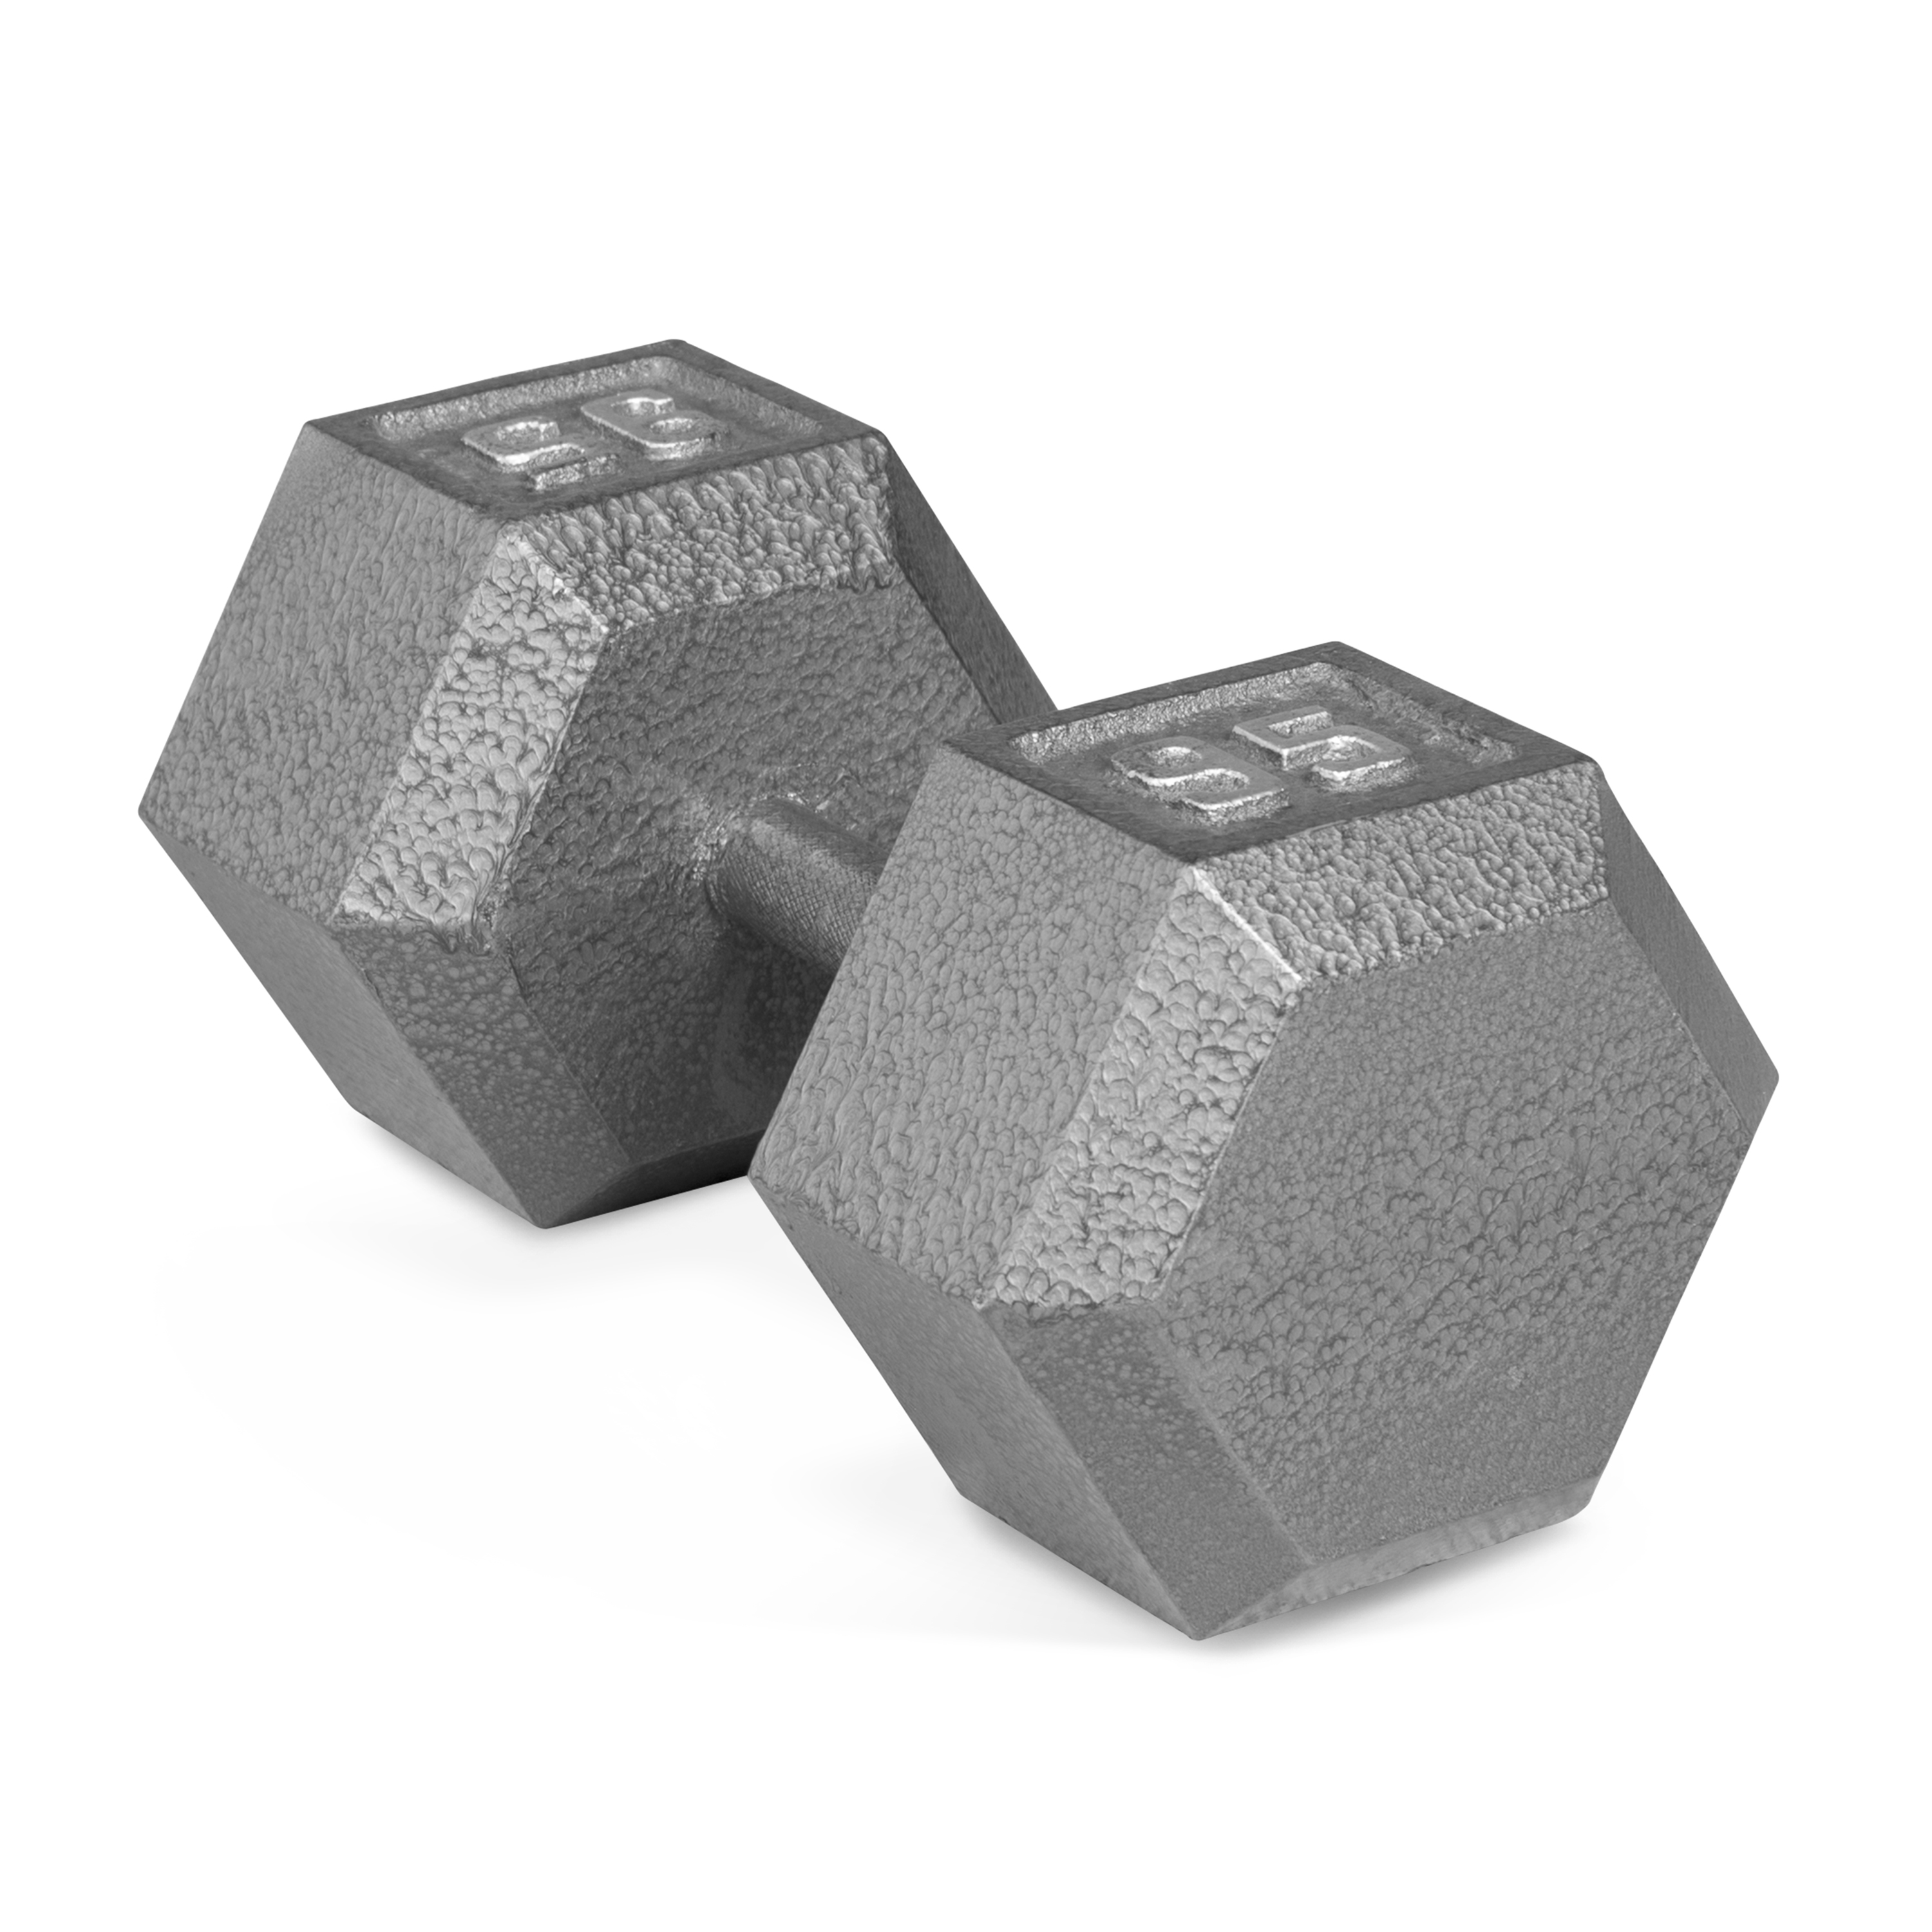 CAP Barbell 95lb Cast Iron Hex Dumbbell, Single - image 1 of 6